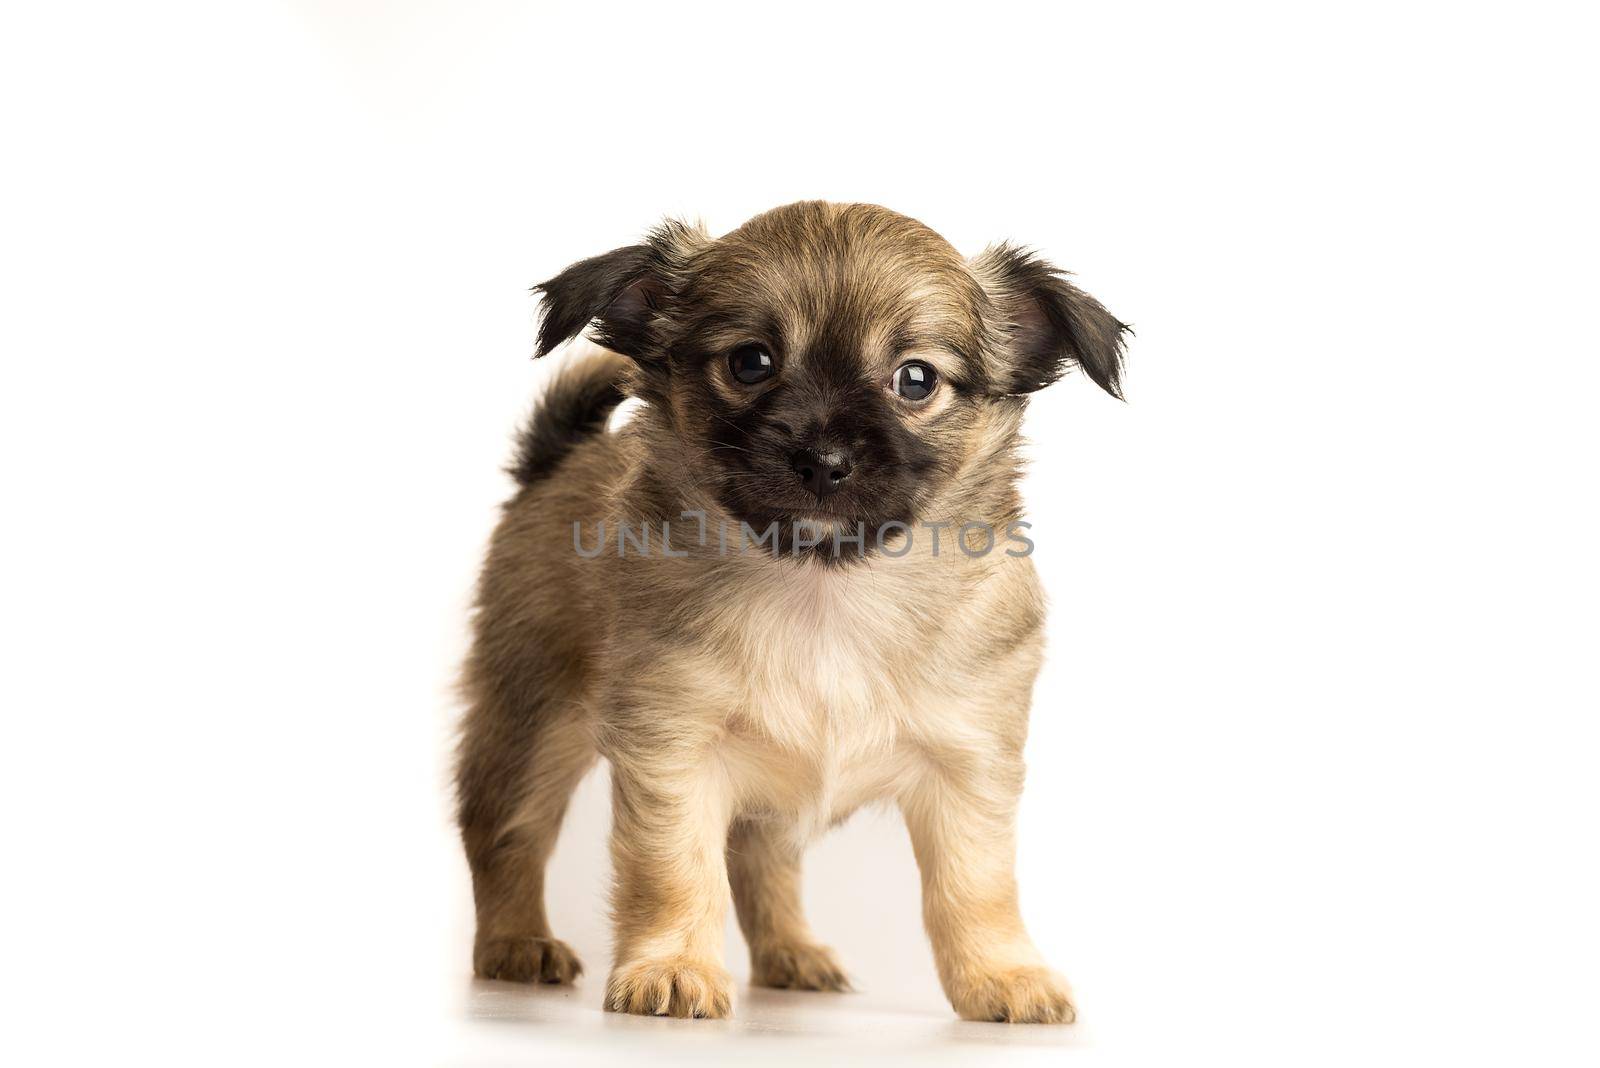 Cute little chihuahua puppy isolated in white background front view by LeoniekvanderVliet